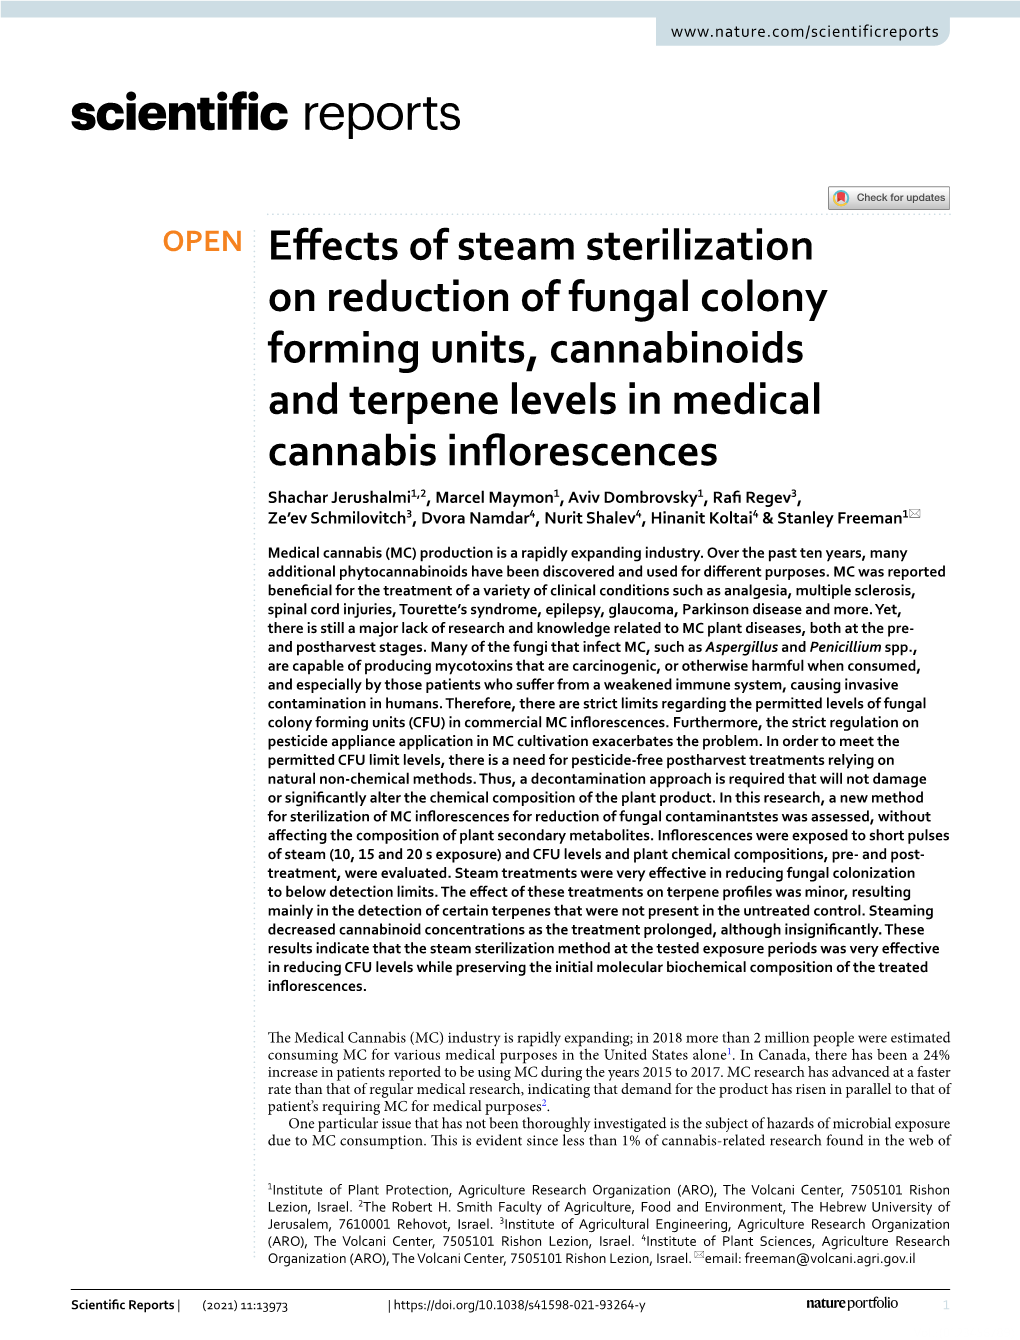 Effects of Steam Sterilization on Reduction of Fungal Colony Forming